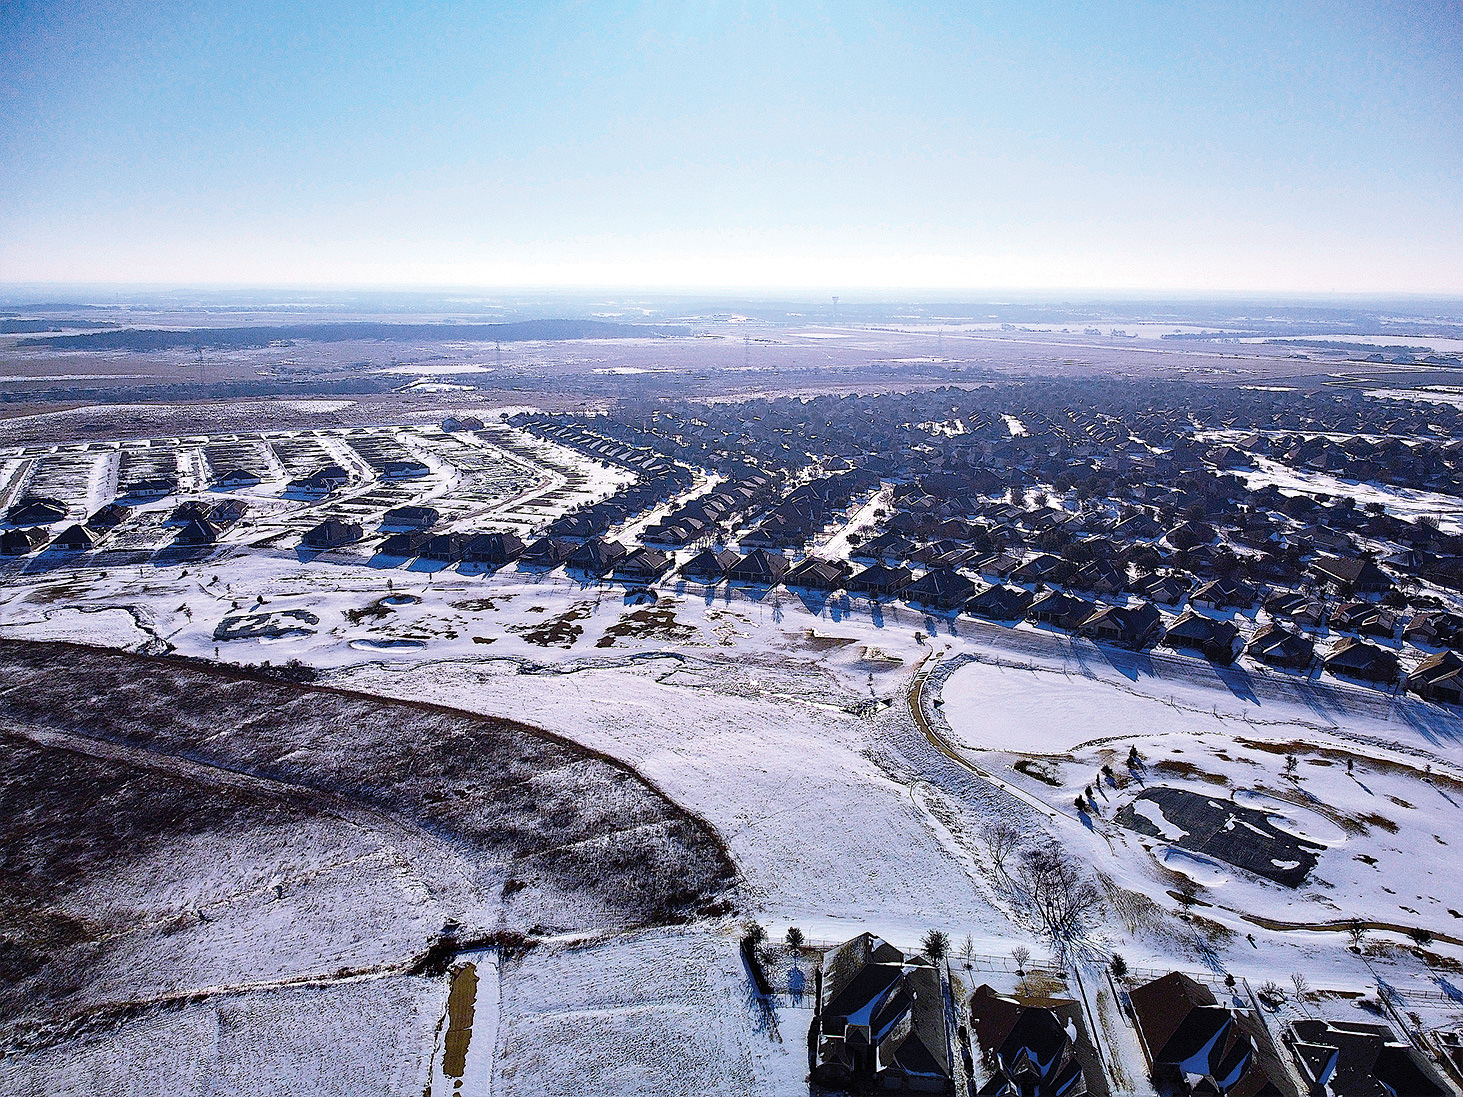 Minus 12 degrees and 40 knot gusts; photo taken on the fly as the drone passed overhead. Pond frozen and snow-covered.